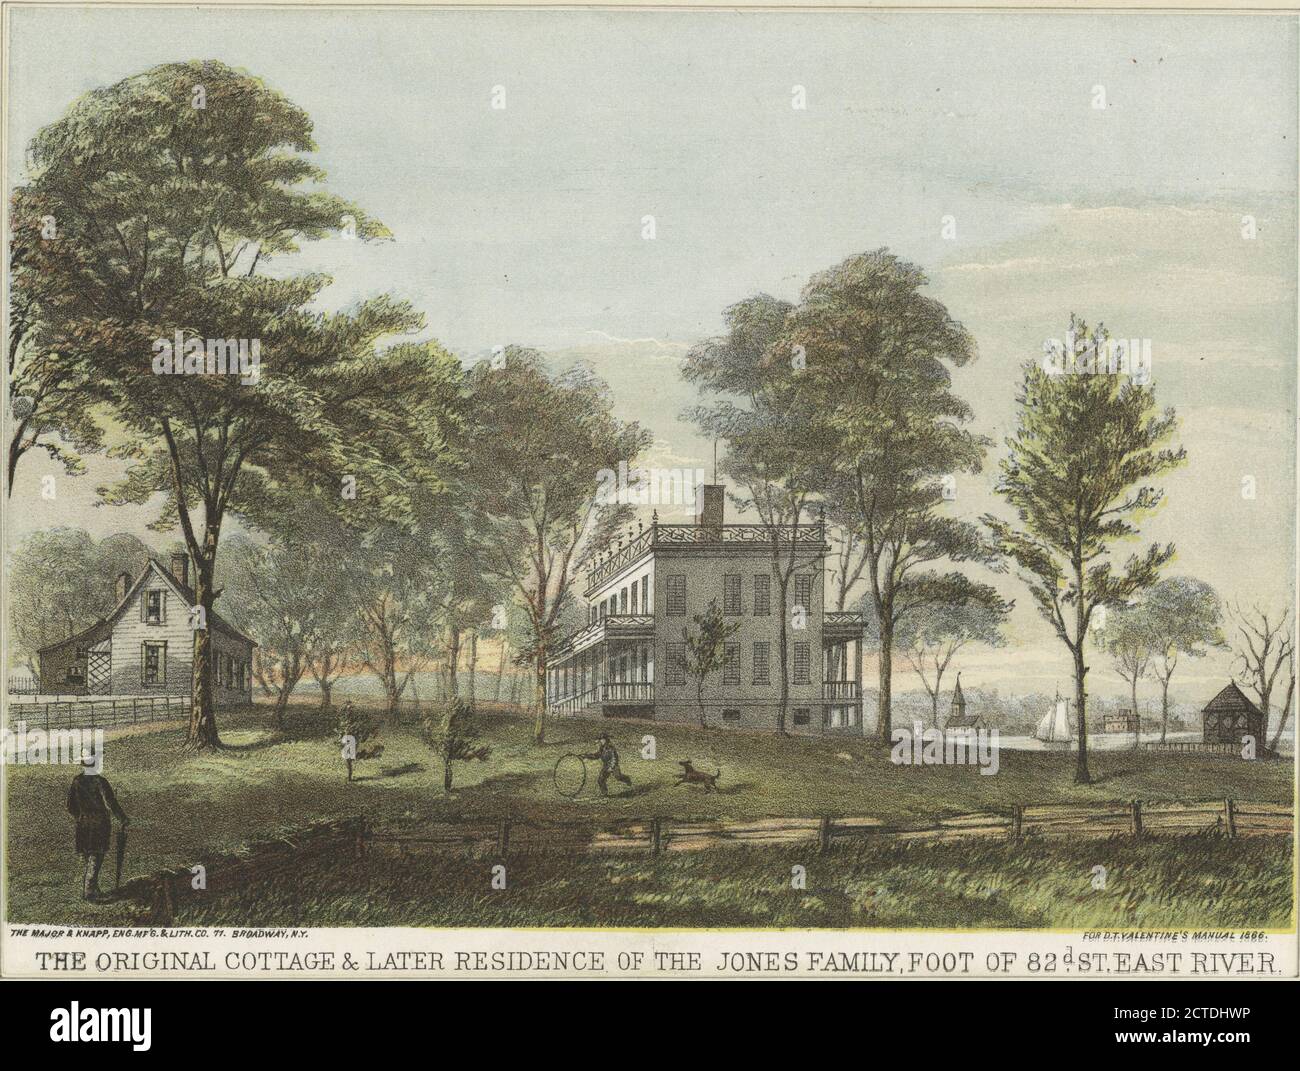 The Original Cottage & Later Residence of the Jones Family, foot of 82nd St. East River, still image, Prints, 1801 - 1886 Stock Photo